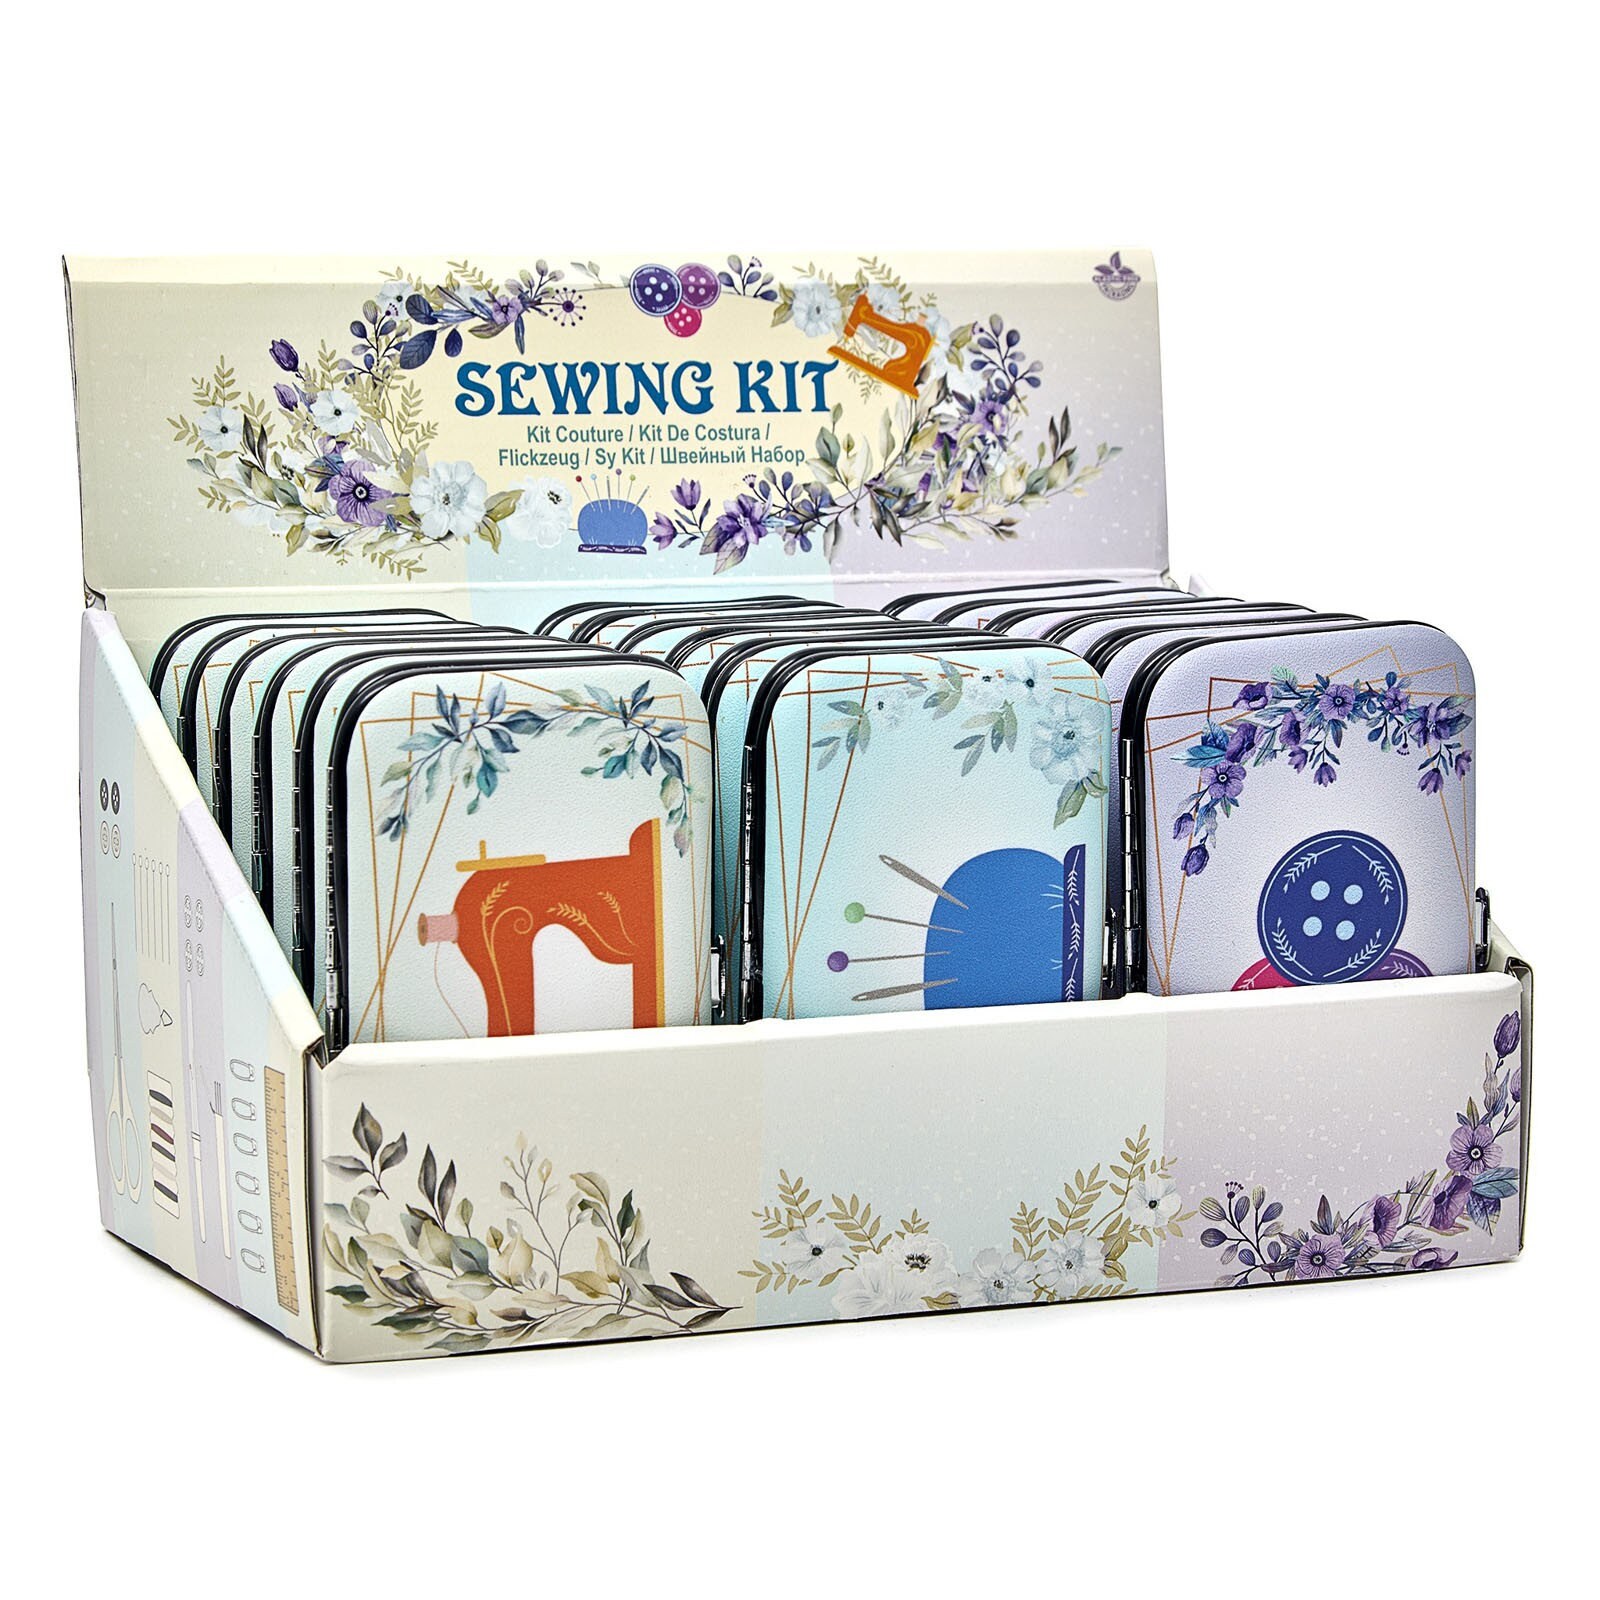 Magnetic Sewing Kit Travel Set, Tailoring Tools for Adult Home